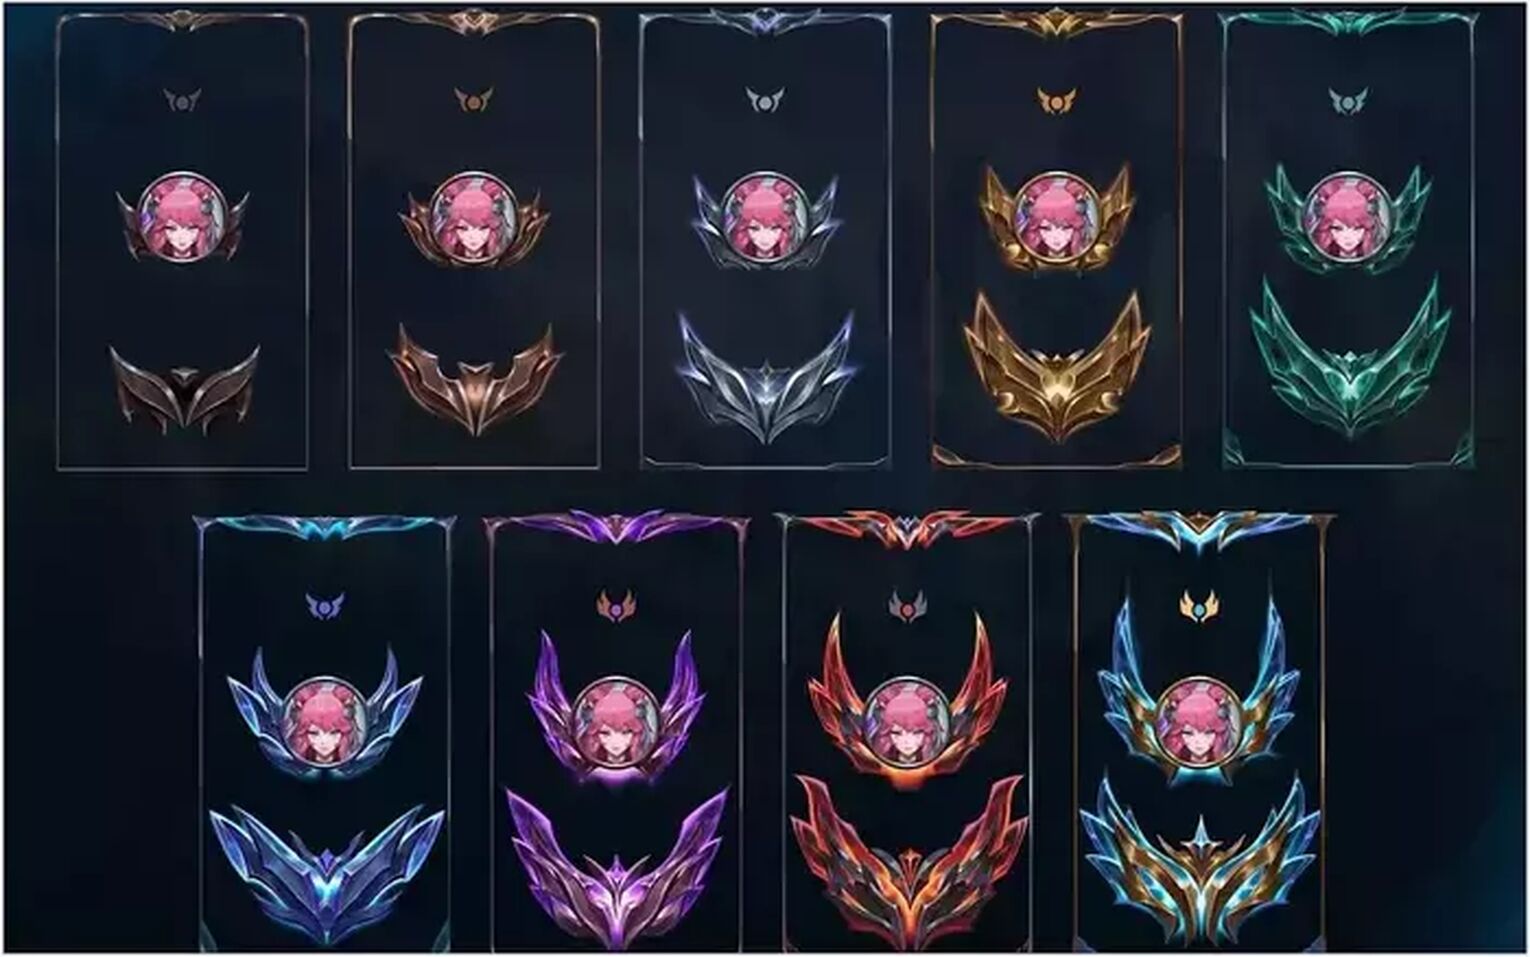 How to Change Borders in League of Legends